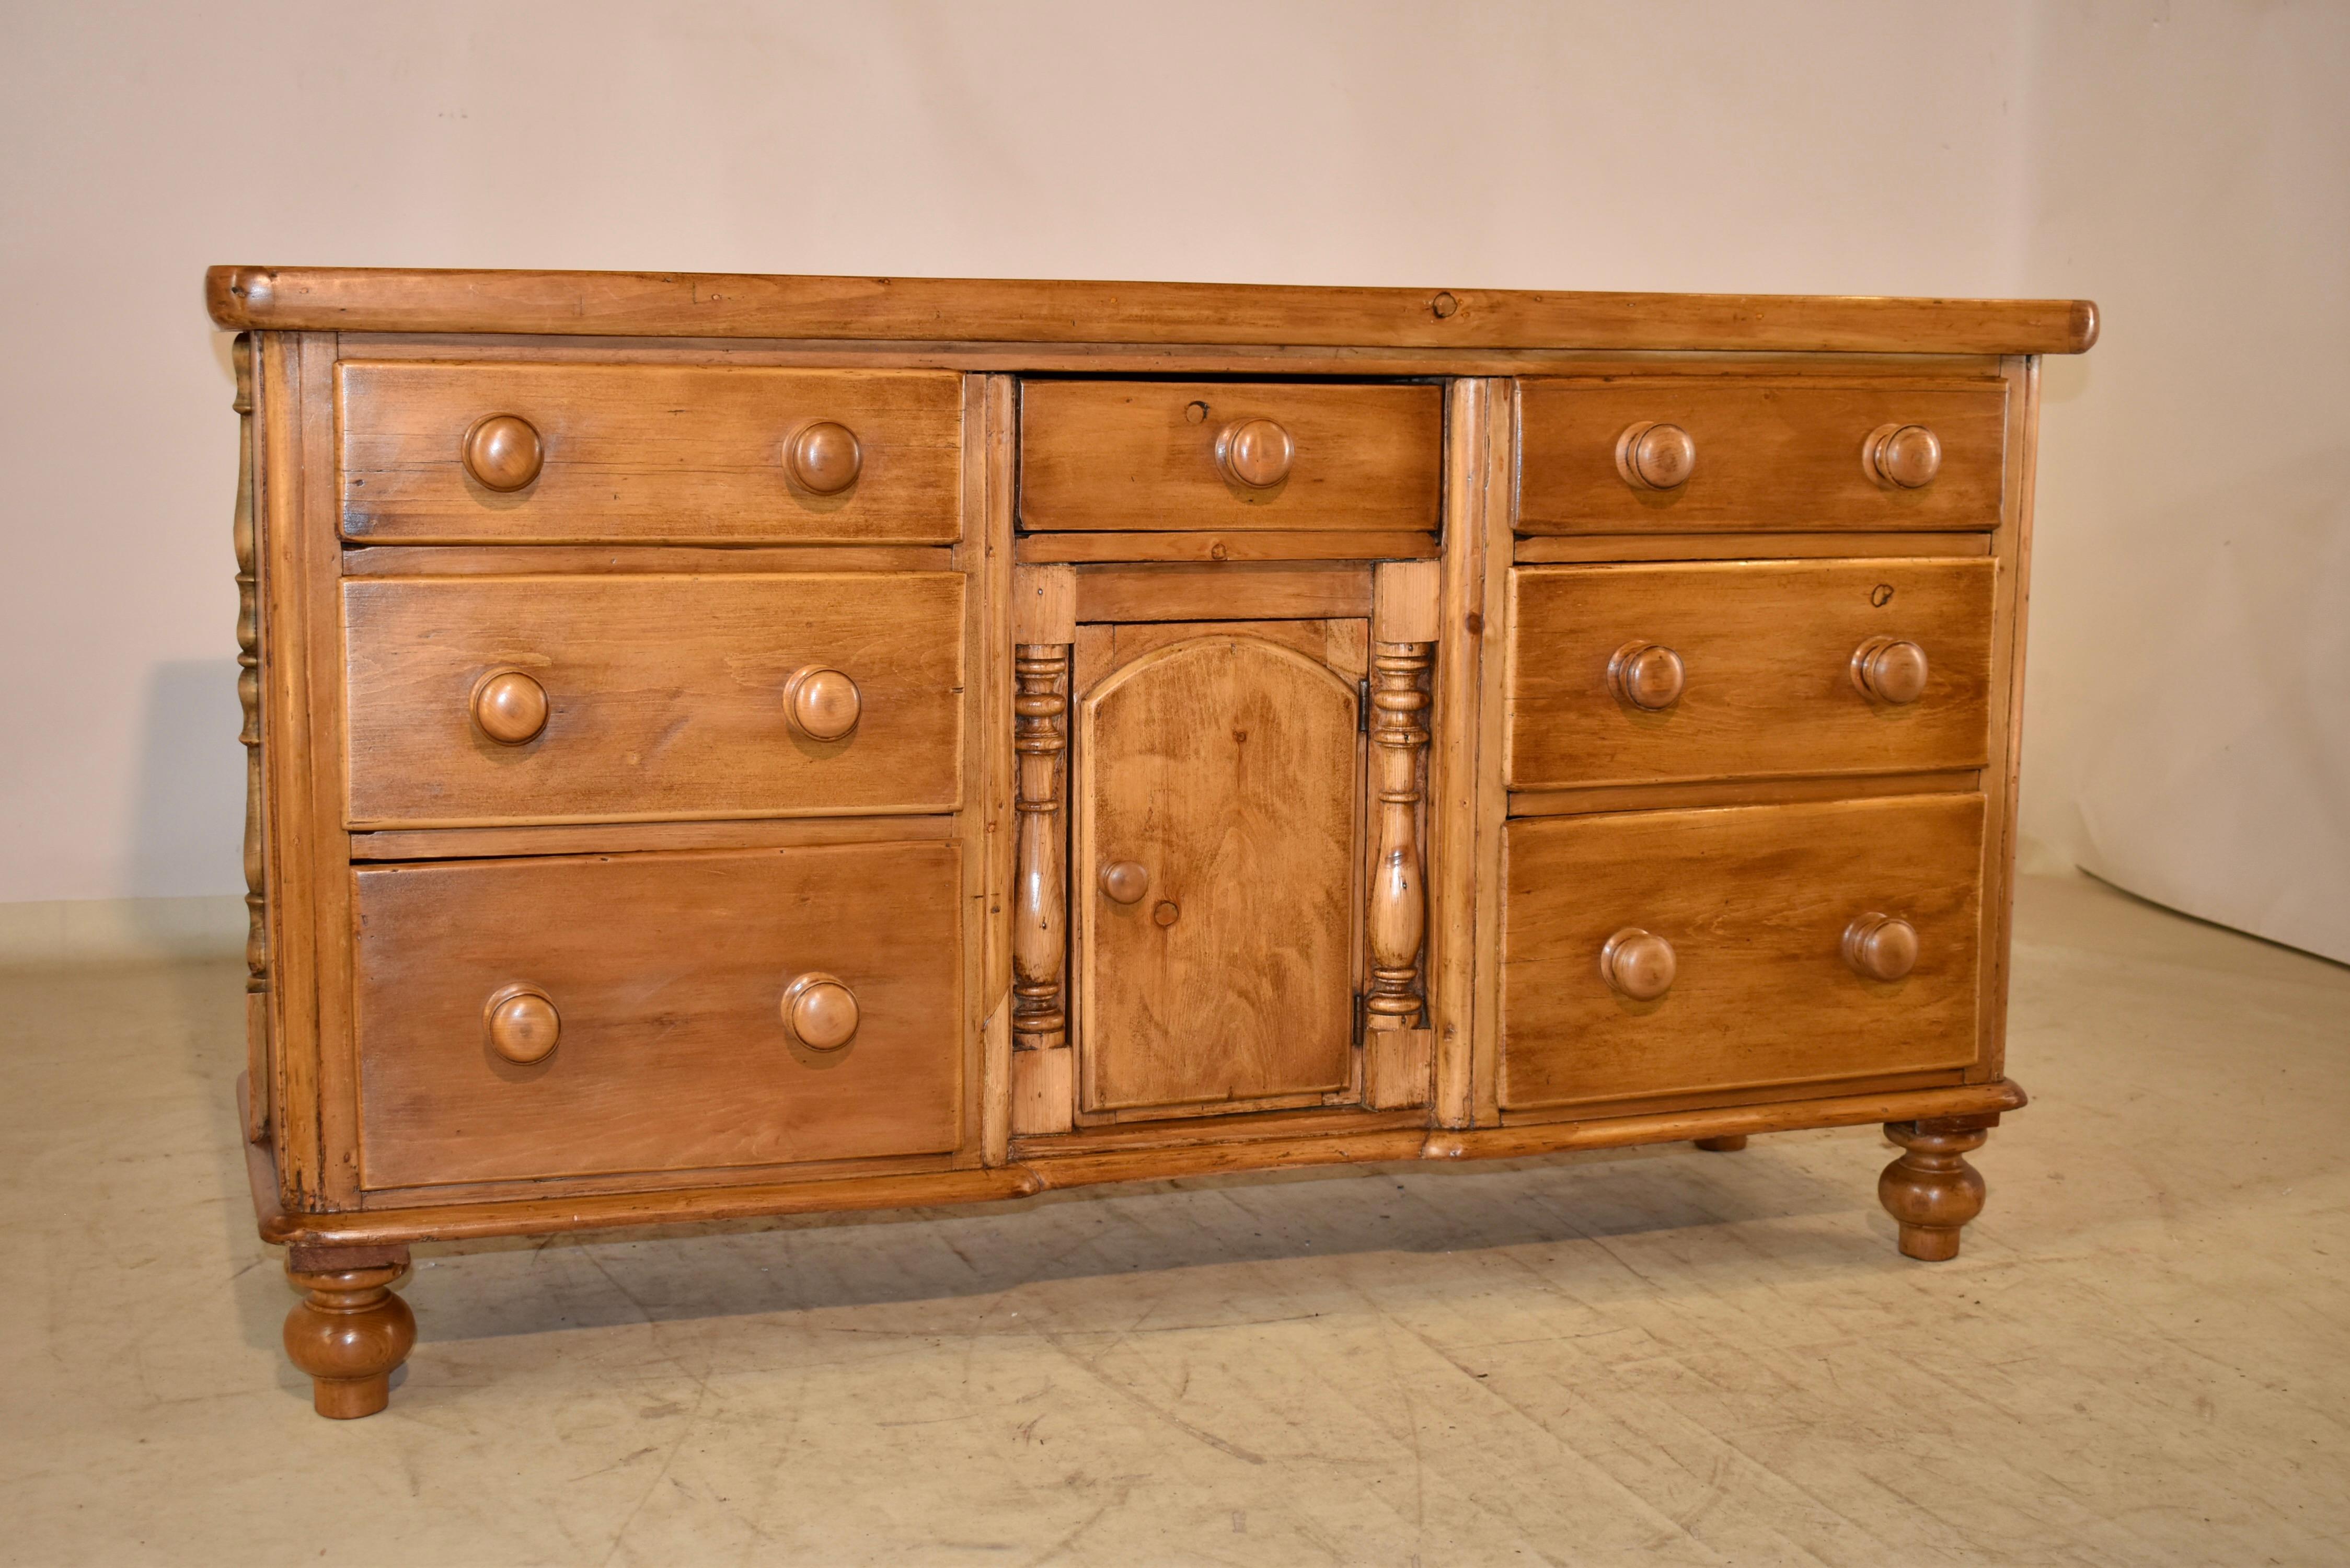 19th century pine dresser base from England.  The top is 1.75 inches thick, which is an amazing feature for this dresser base!  The top follows down to simple sides, both with applied moldings for added design interest.  The from of the case has two